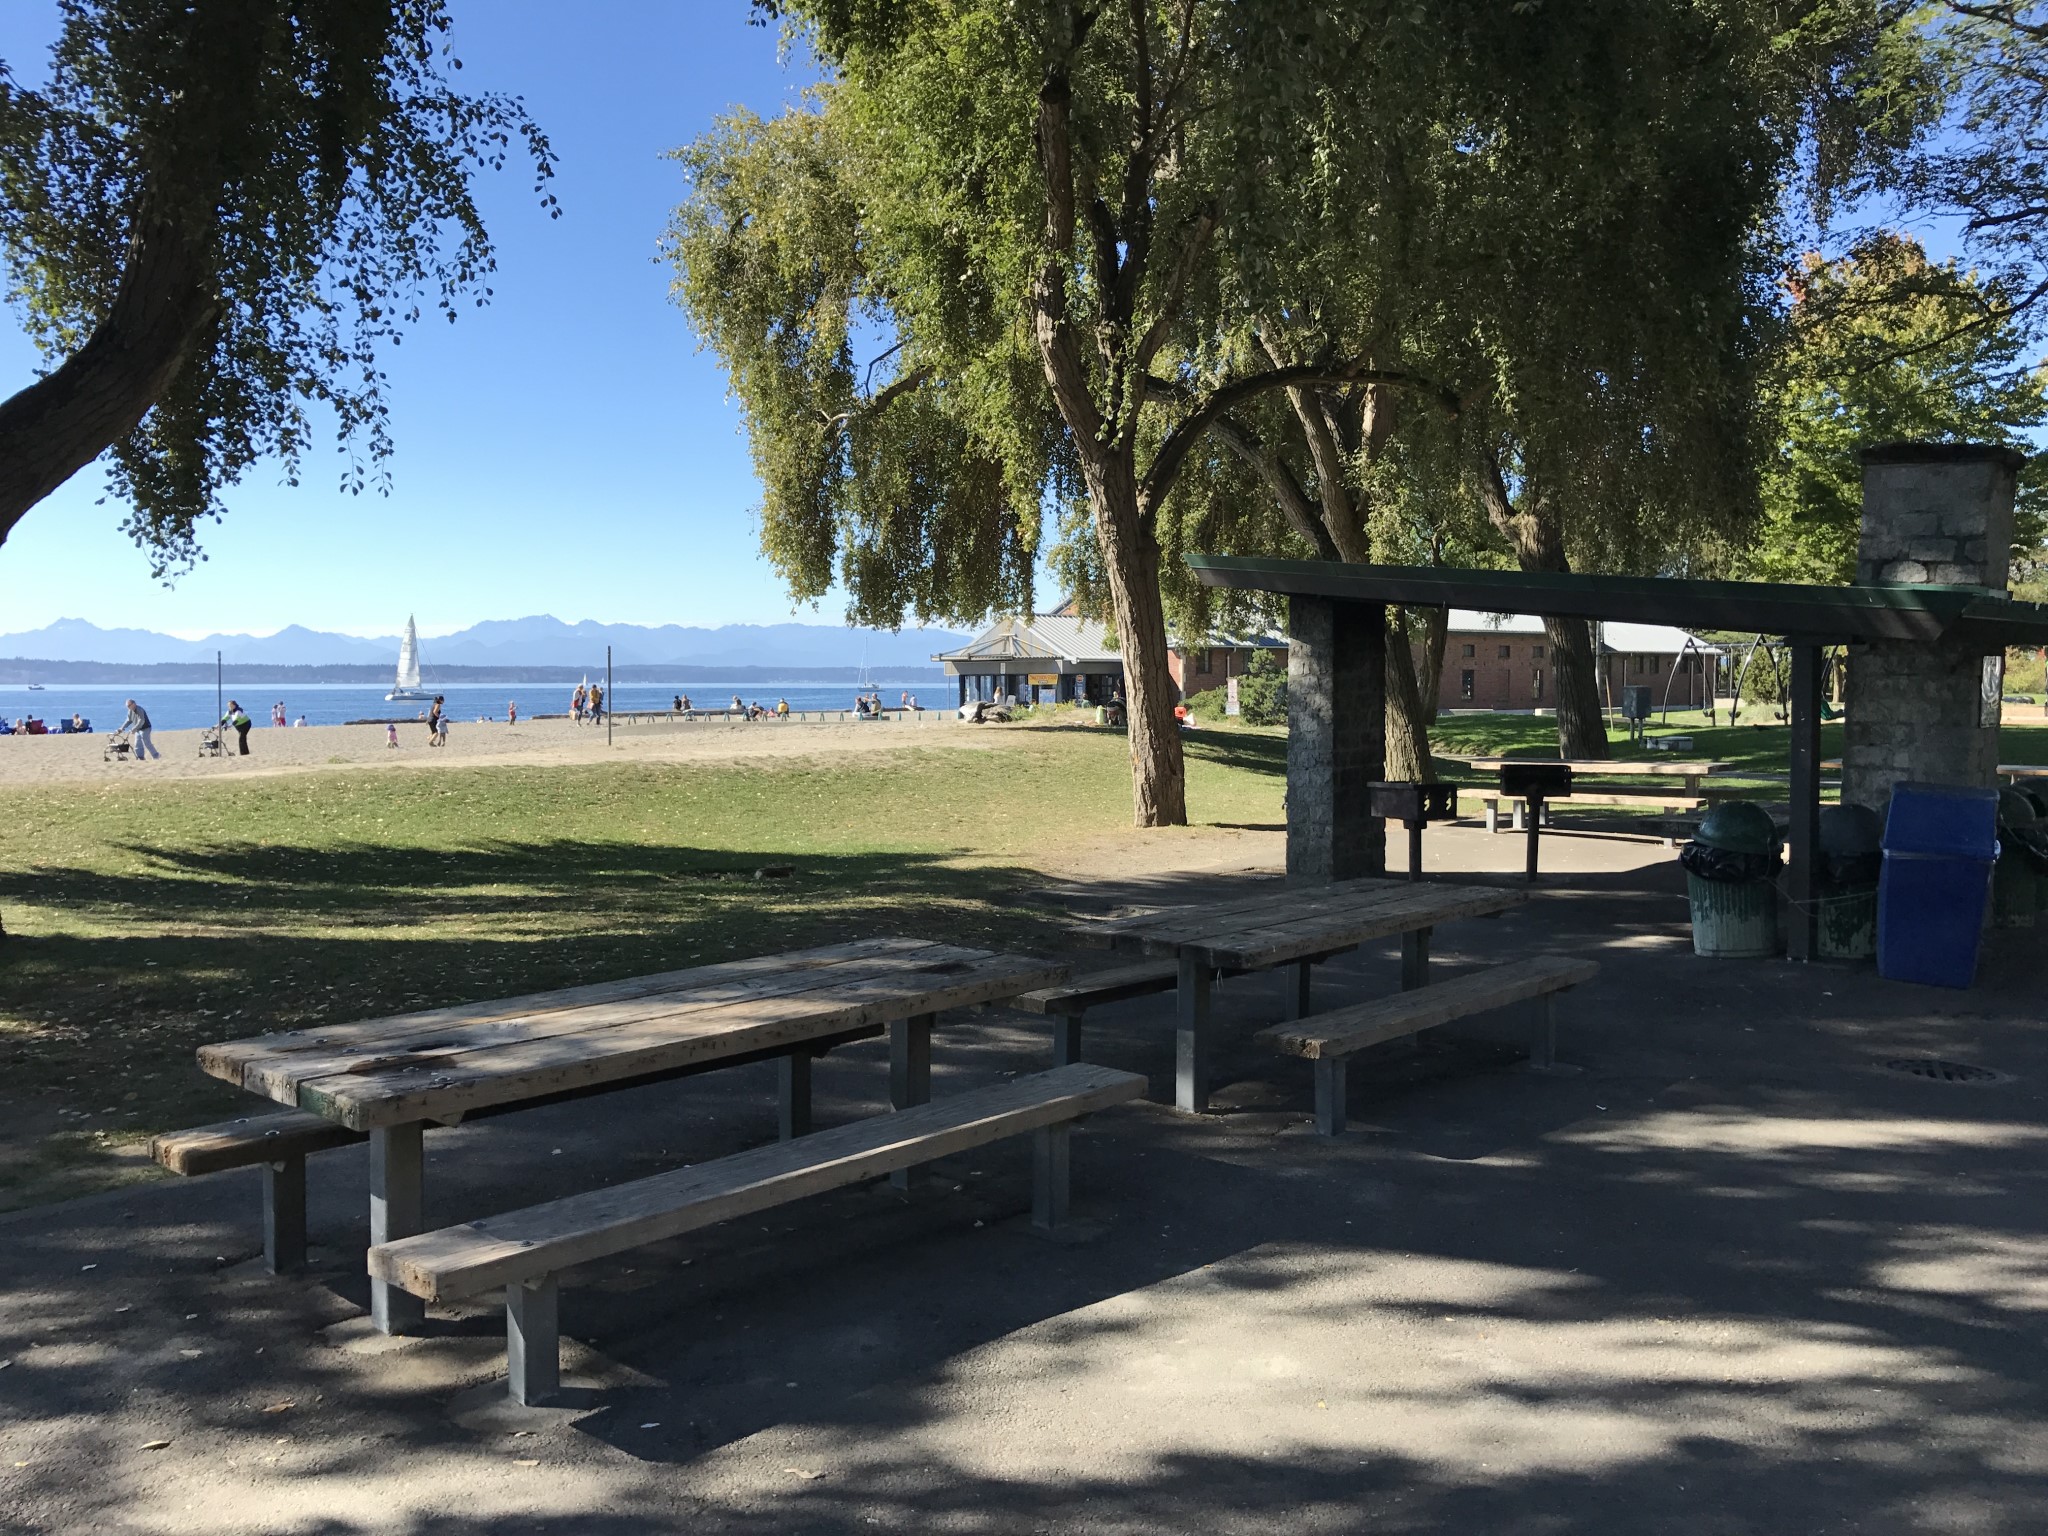 Picnic table and shelter at the beach